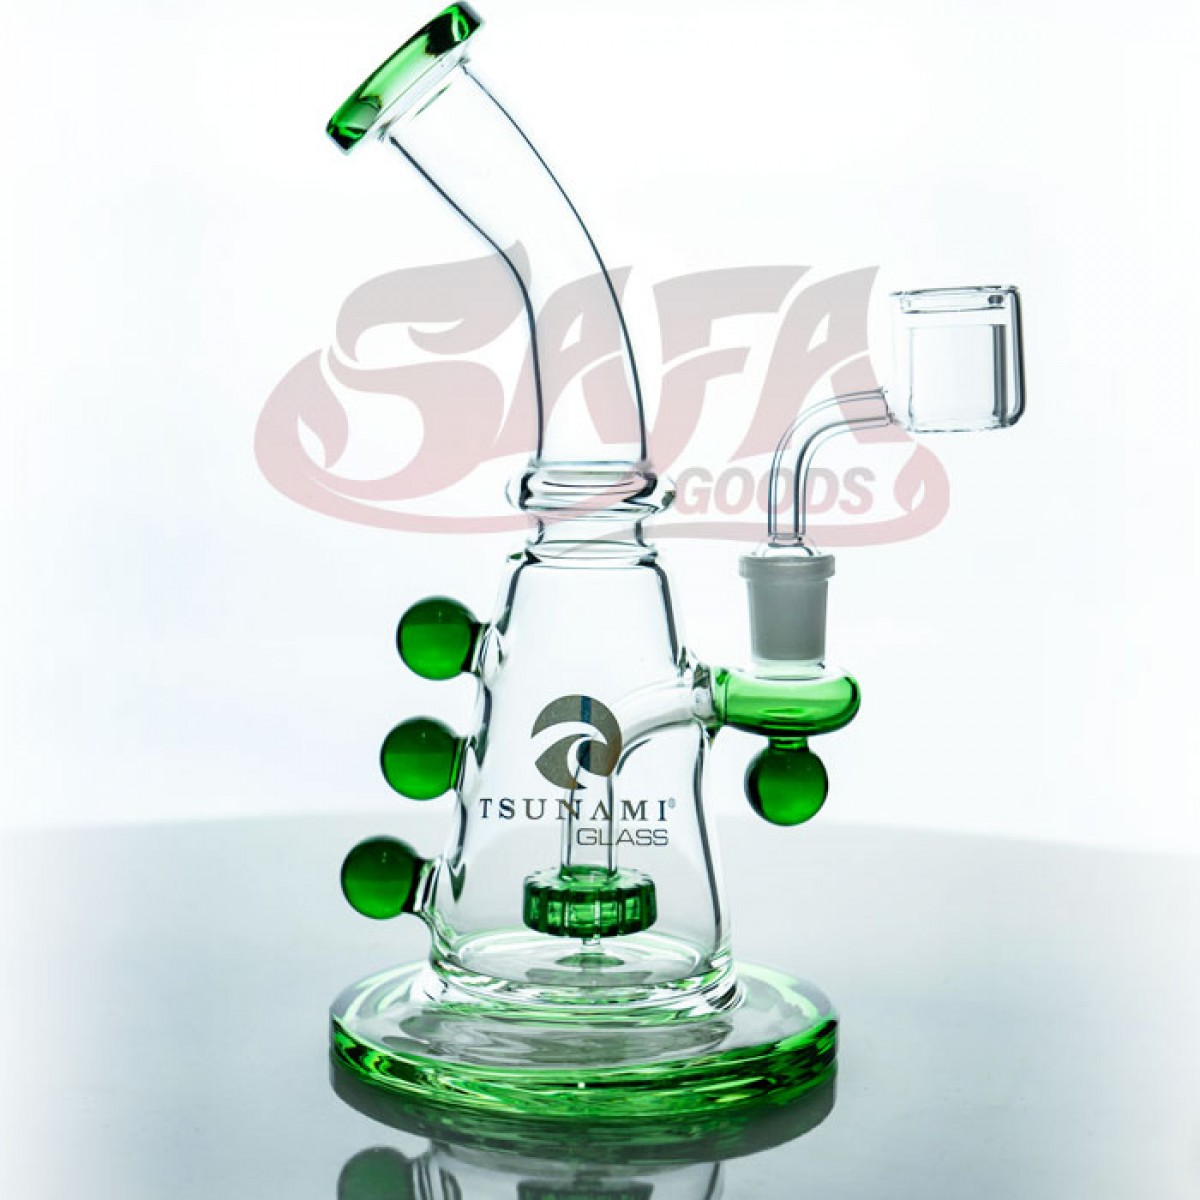 Tsunami 9" Showerhead Marble Concentrate Rig Waterpipe